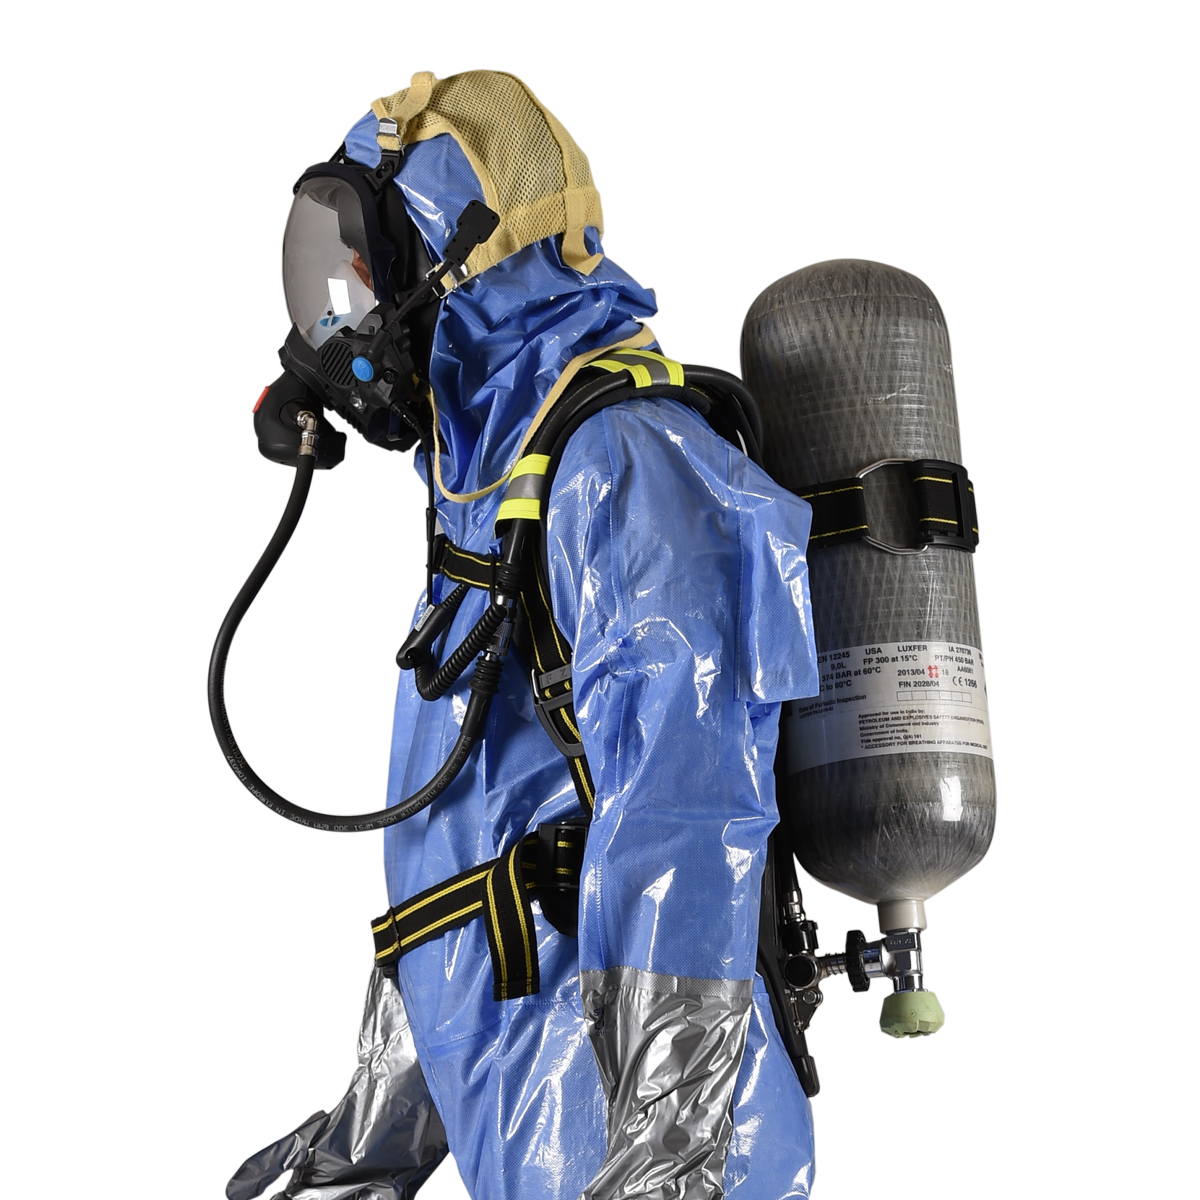 Self Contained Breathing Apparatus [SCBA]